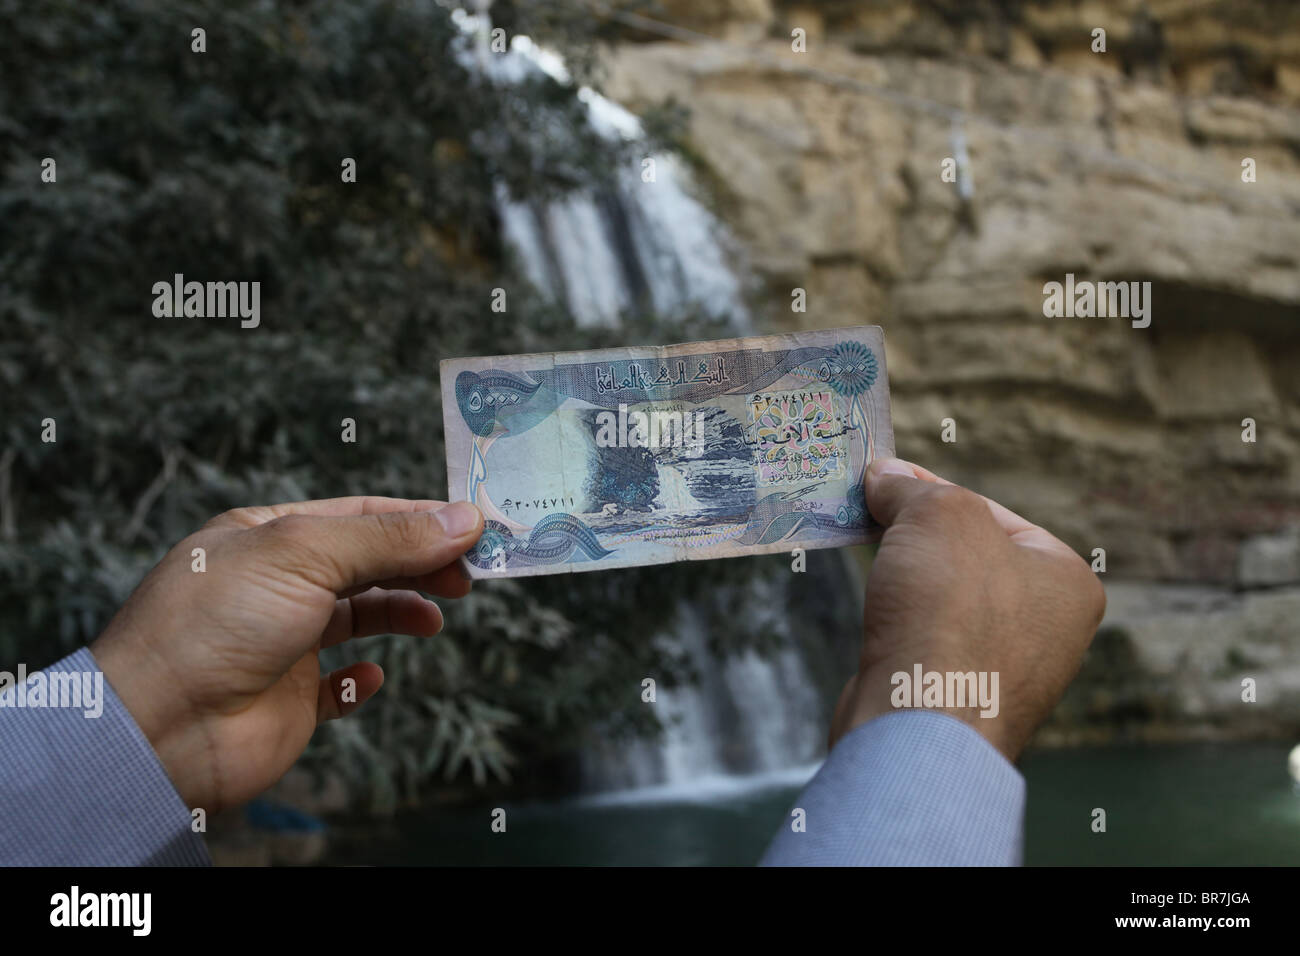 A man holds a 5,000 Iraqi dinar at the waterfall of Geli Ali Beg which is pictured in the banknote Kurdistan Northern Iraq Stock Photo